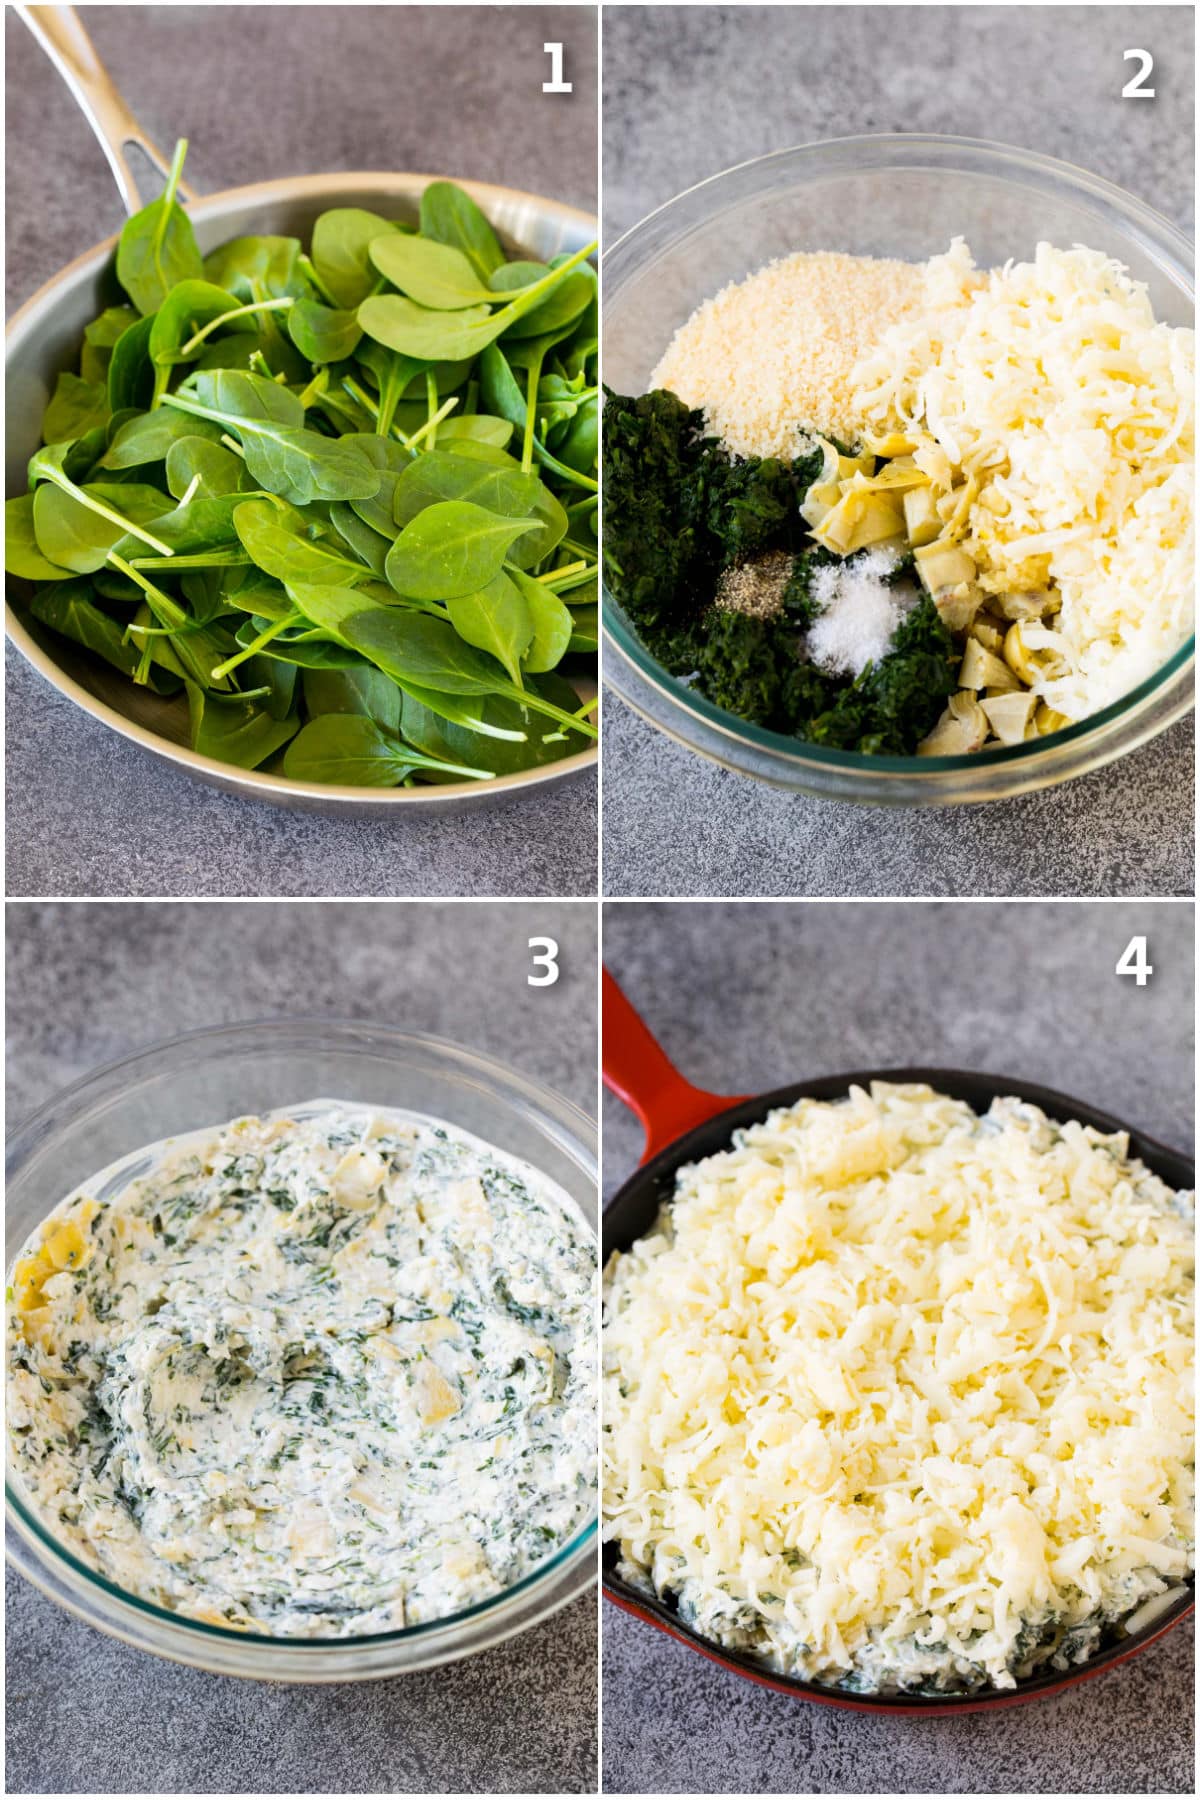 Step by step process shots showing how to make spinach artichoke dip.